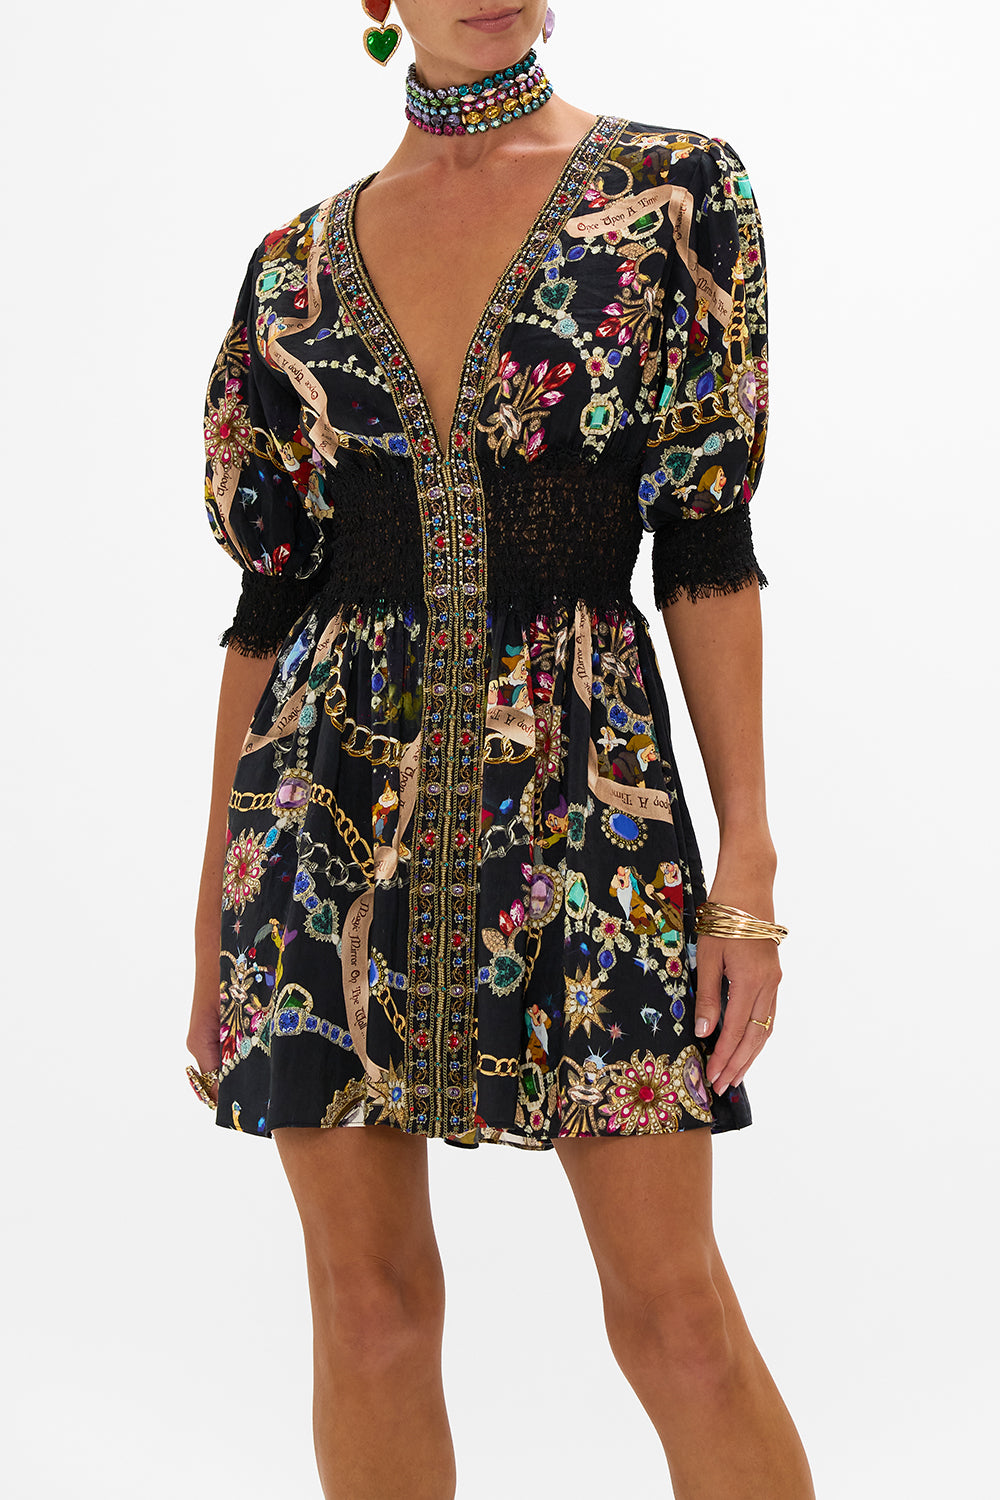 Disney CAMILLA mini dress in Happily Ever After print